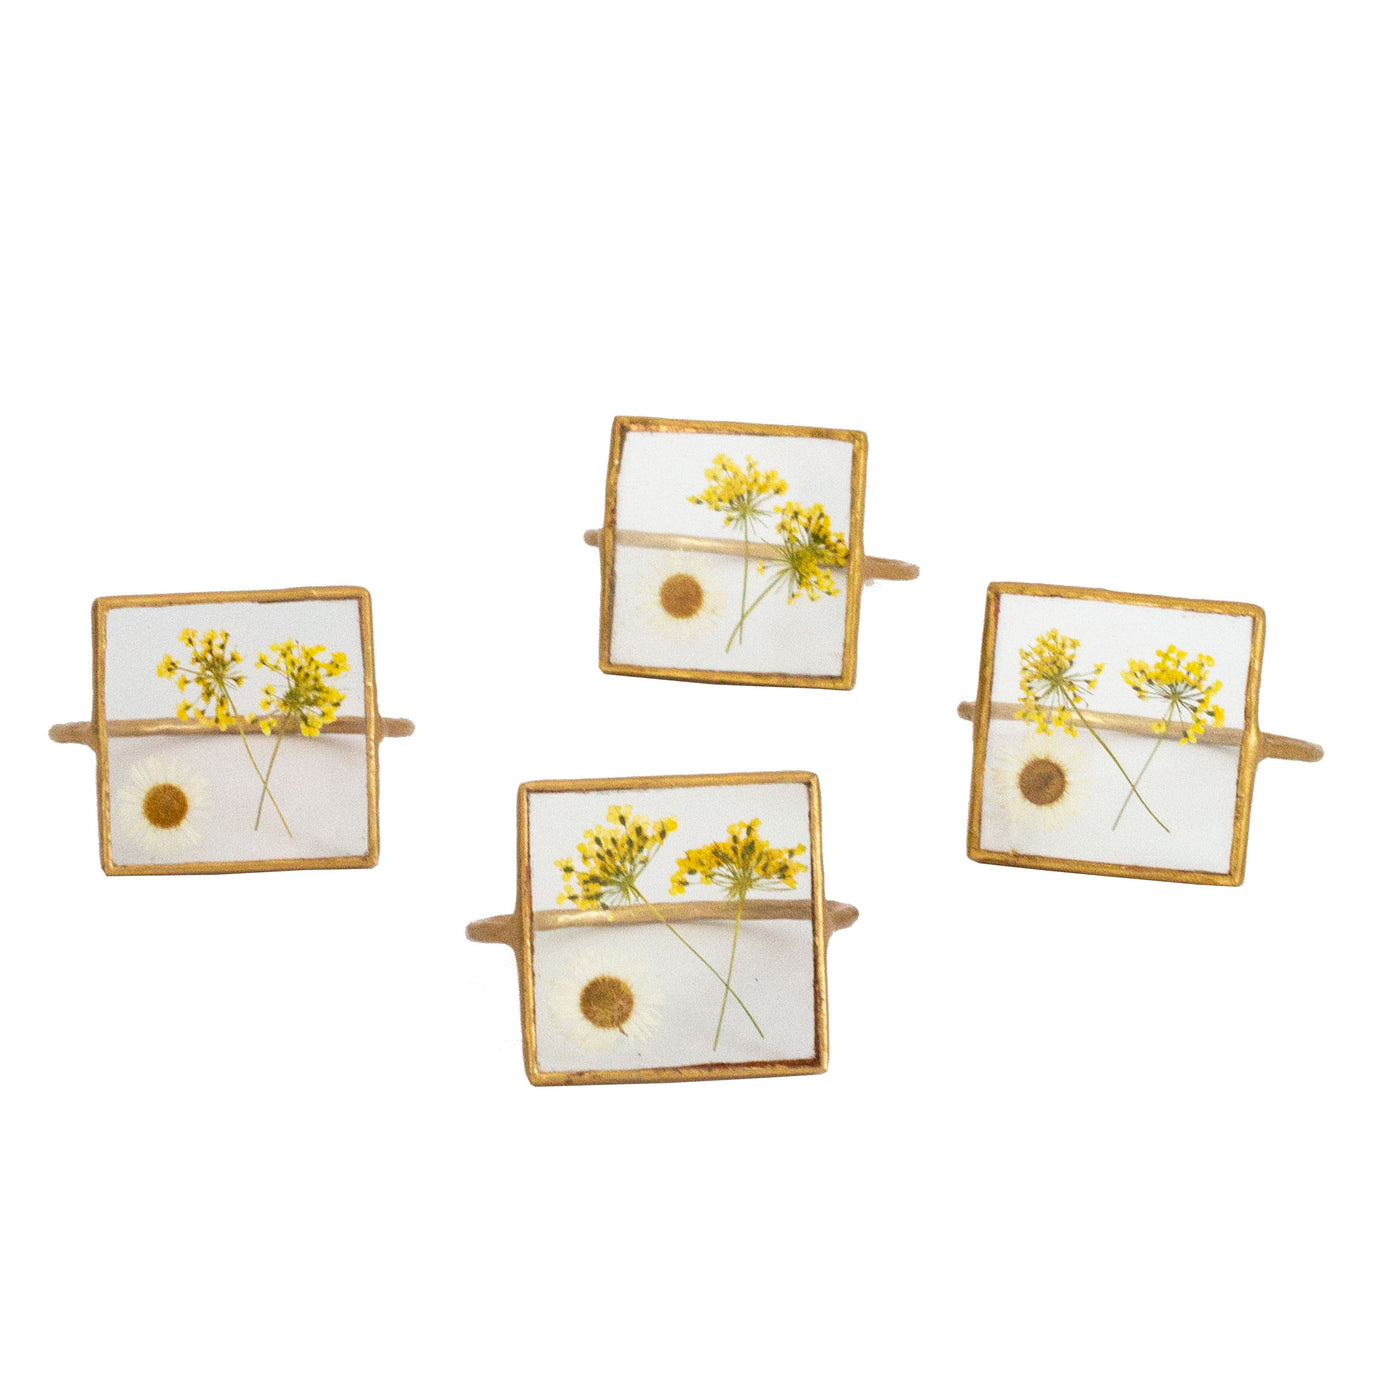 Queen Anne's Lace Square Pressed Floral Napkin Ring Set